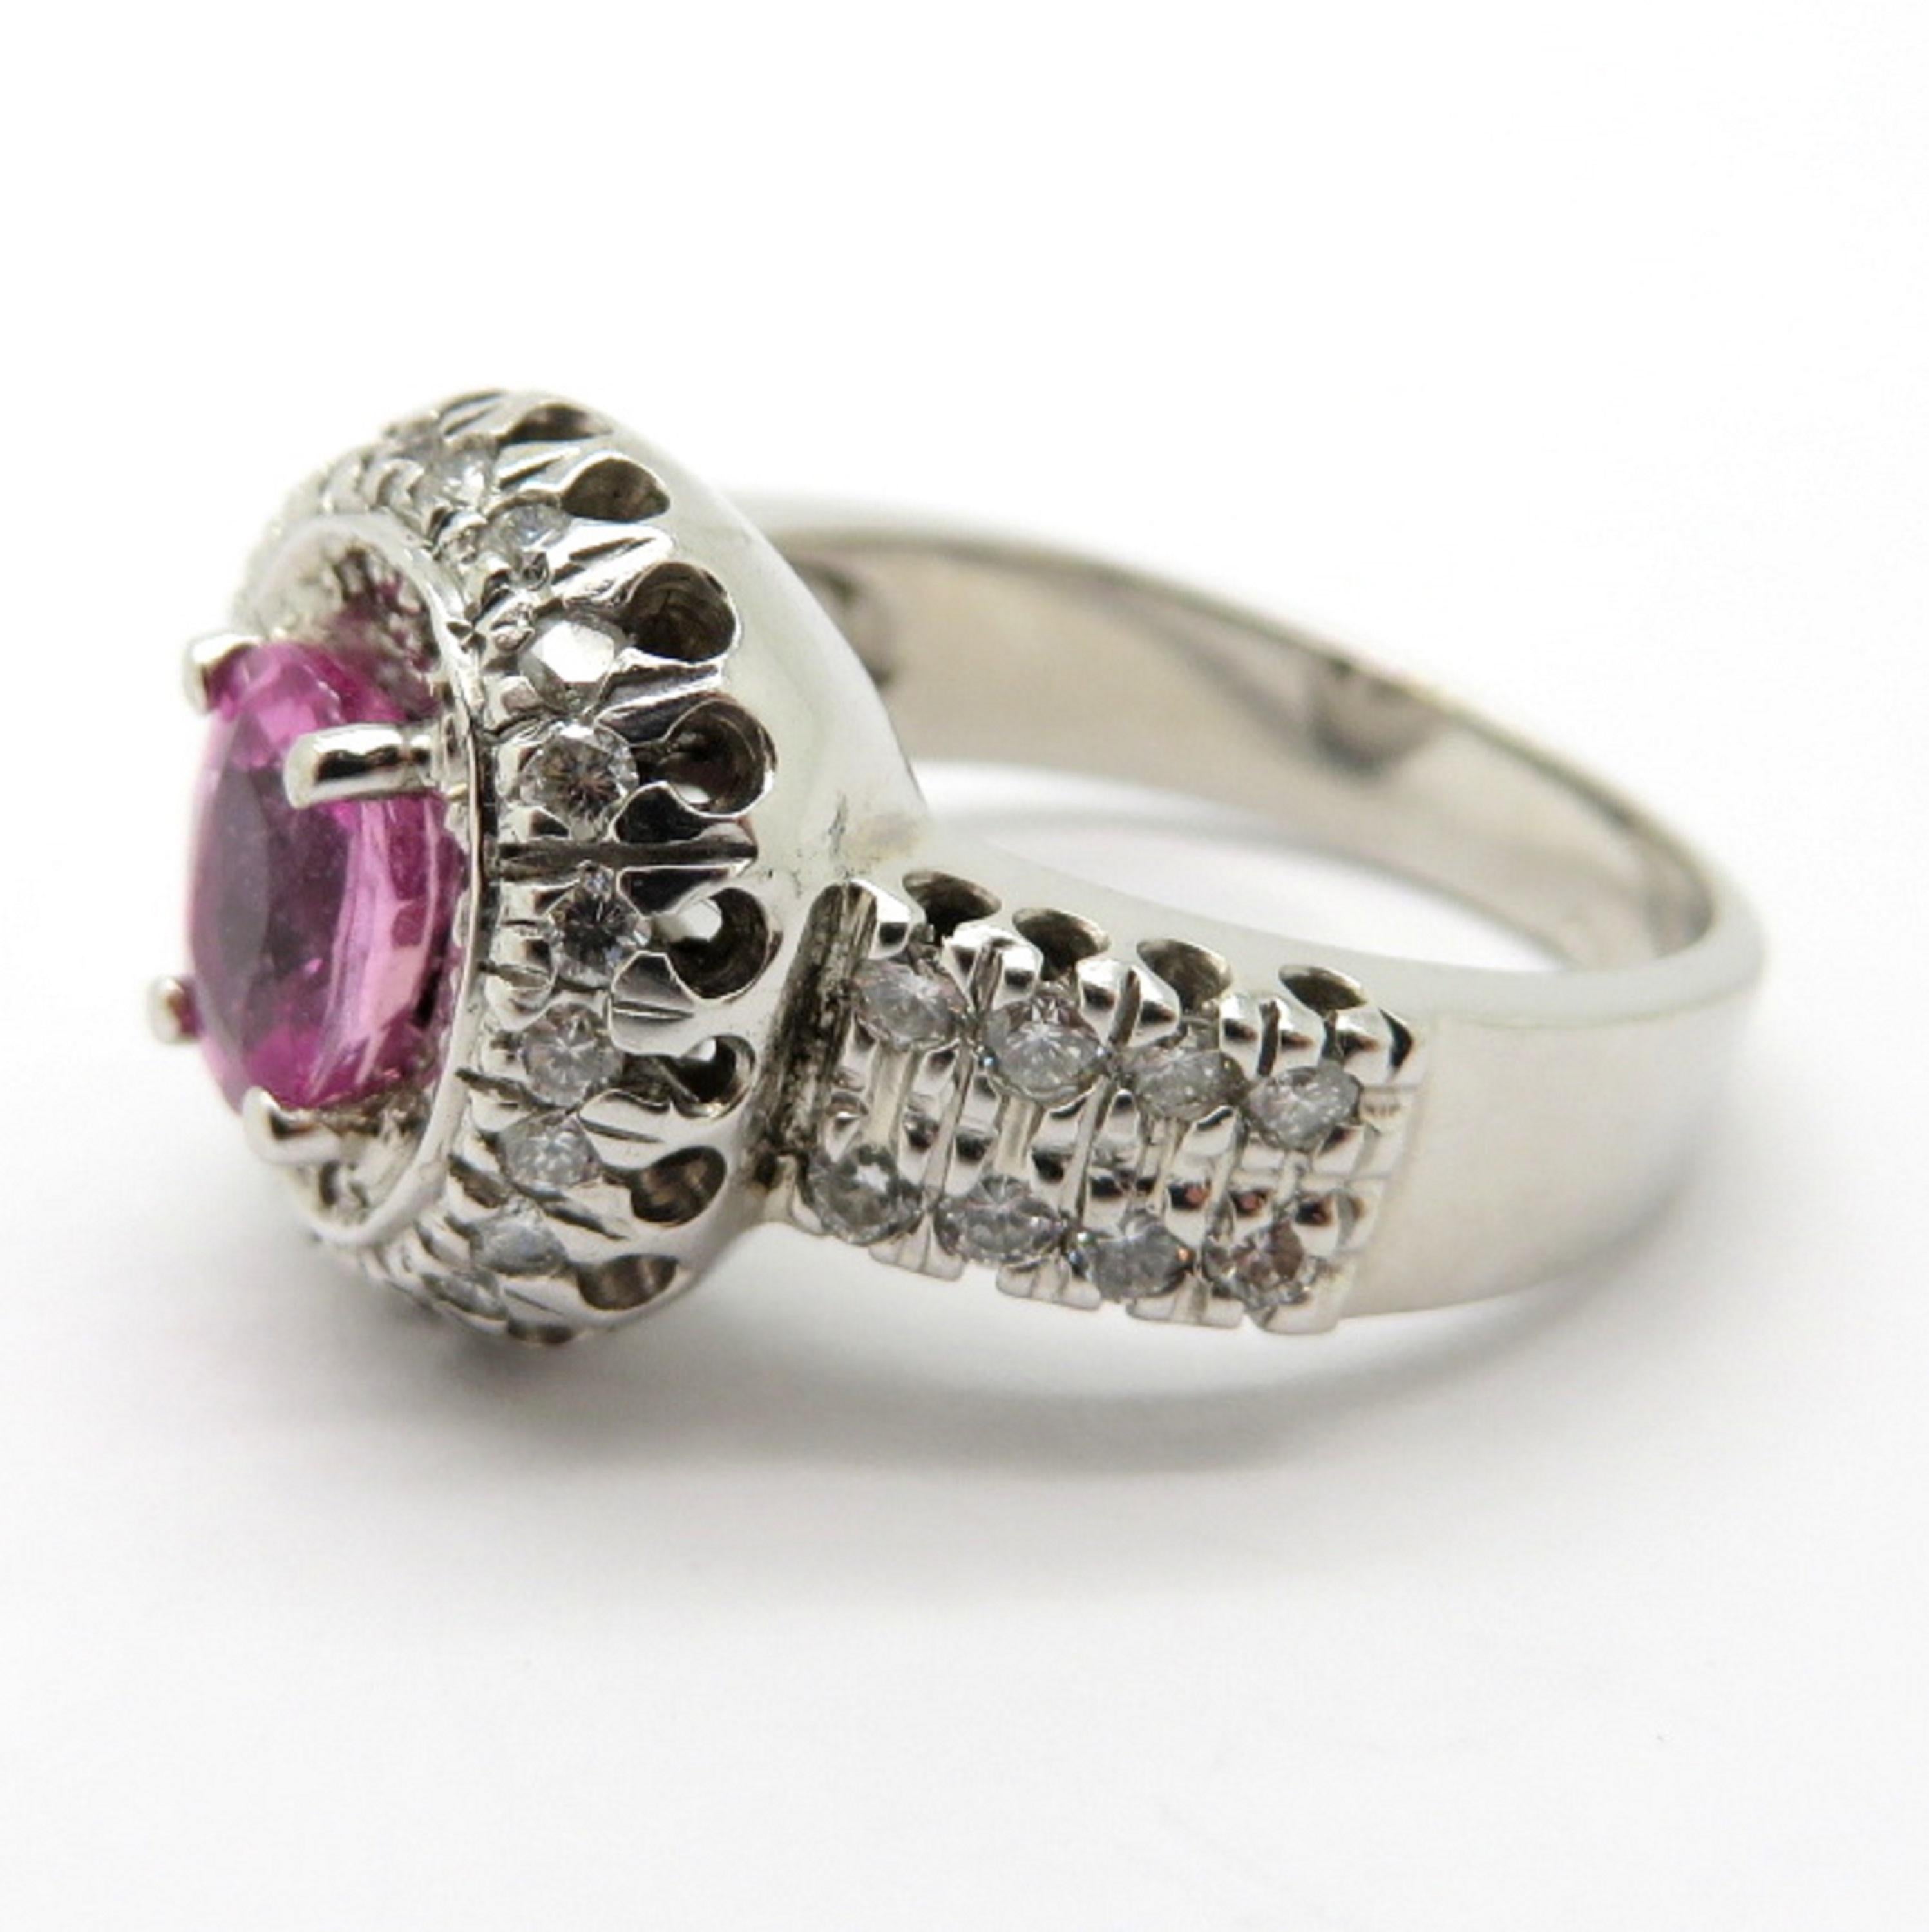 For sale is a beautiful estate 18K White Gold Pink Sapphire and Diamond Ring by designer Gregg Ruth!
Showcasing one (1) Oval Brilliant Cut natural fine quality pink sapphire, four prong set, measuring 6.96 x 4.98 x 3.48 mm, weighing approximately